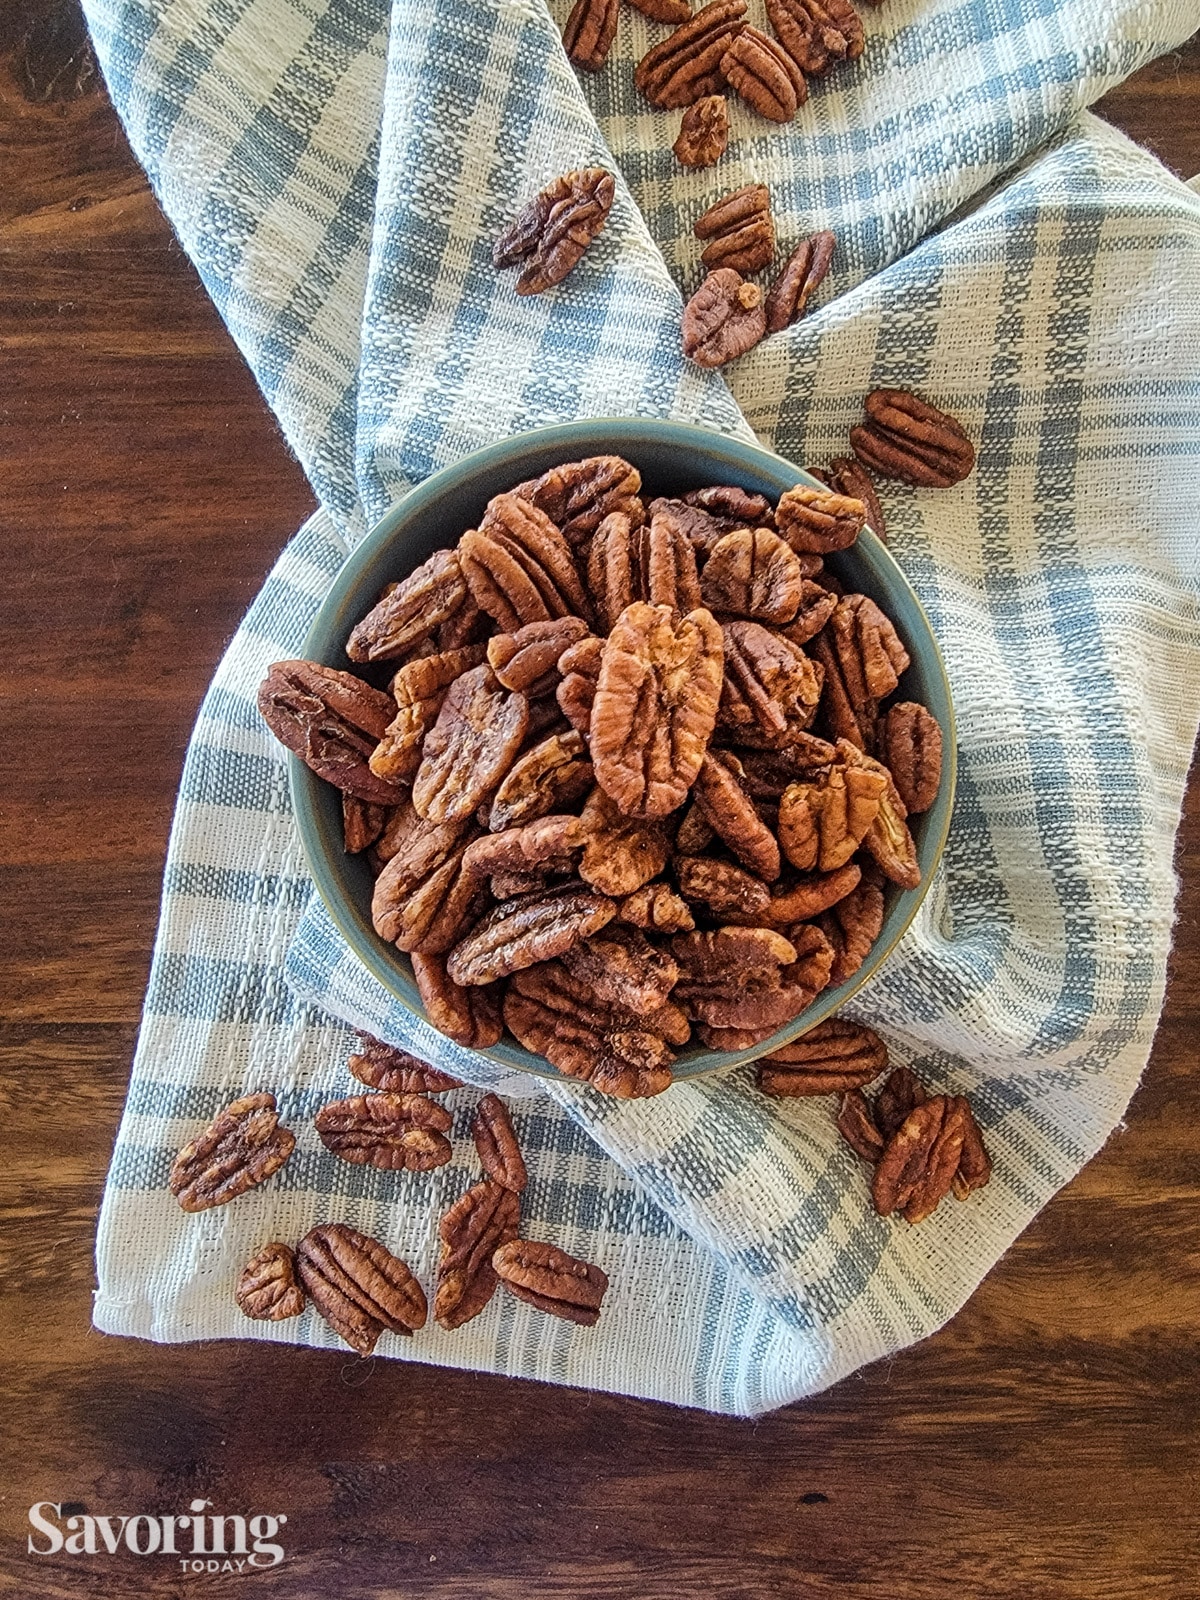 dehydrated pecans in a blue bowl on a blue striped towel